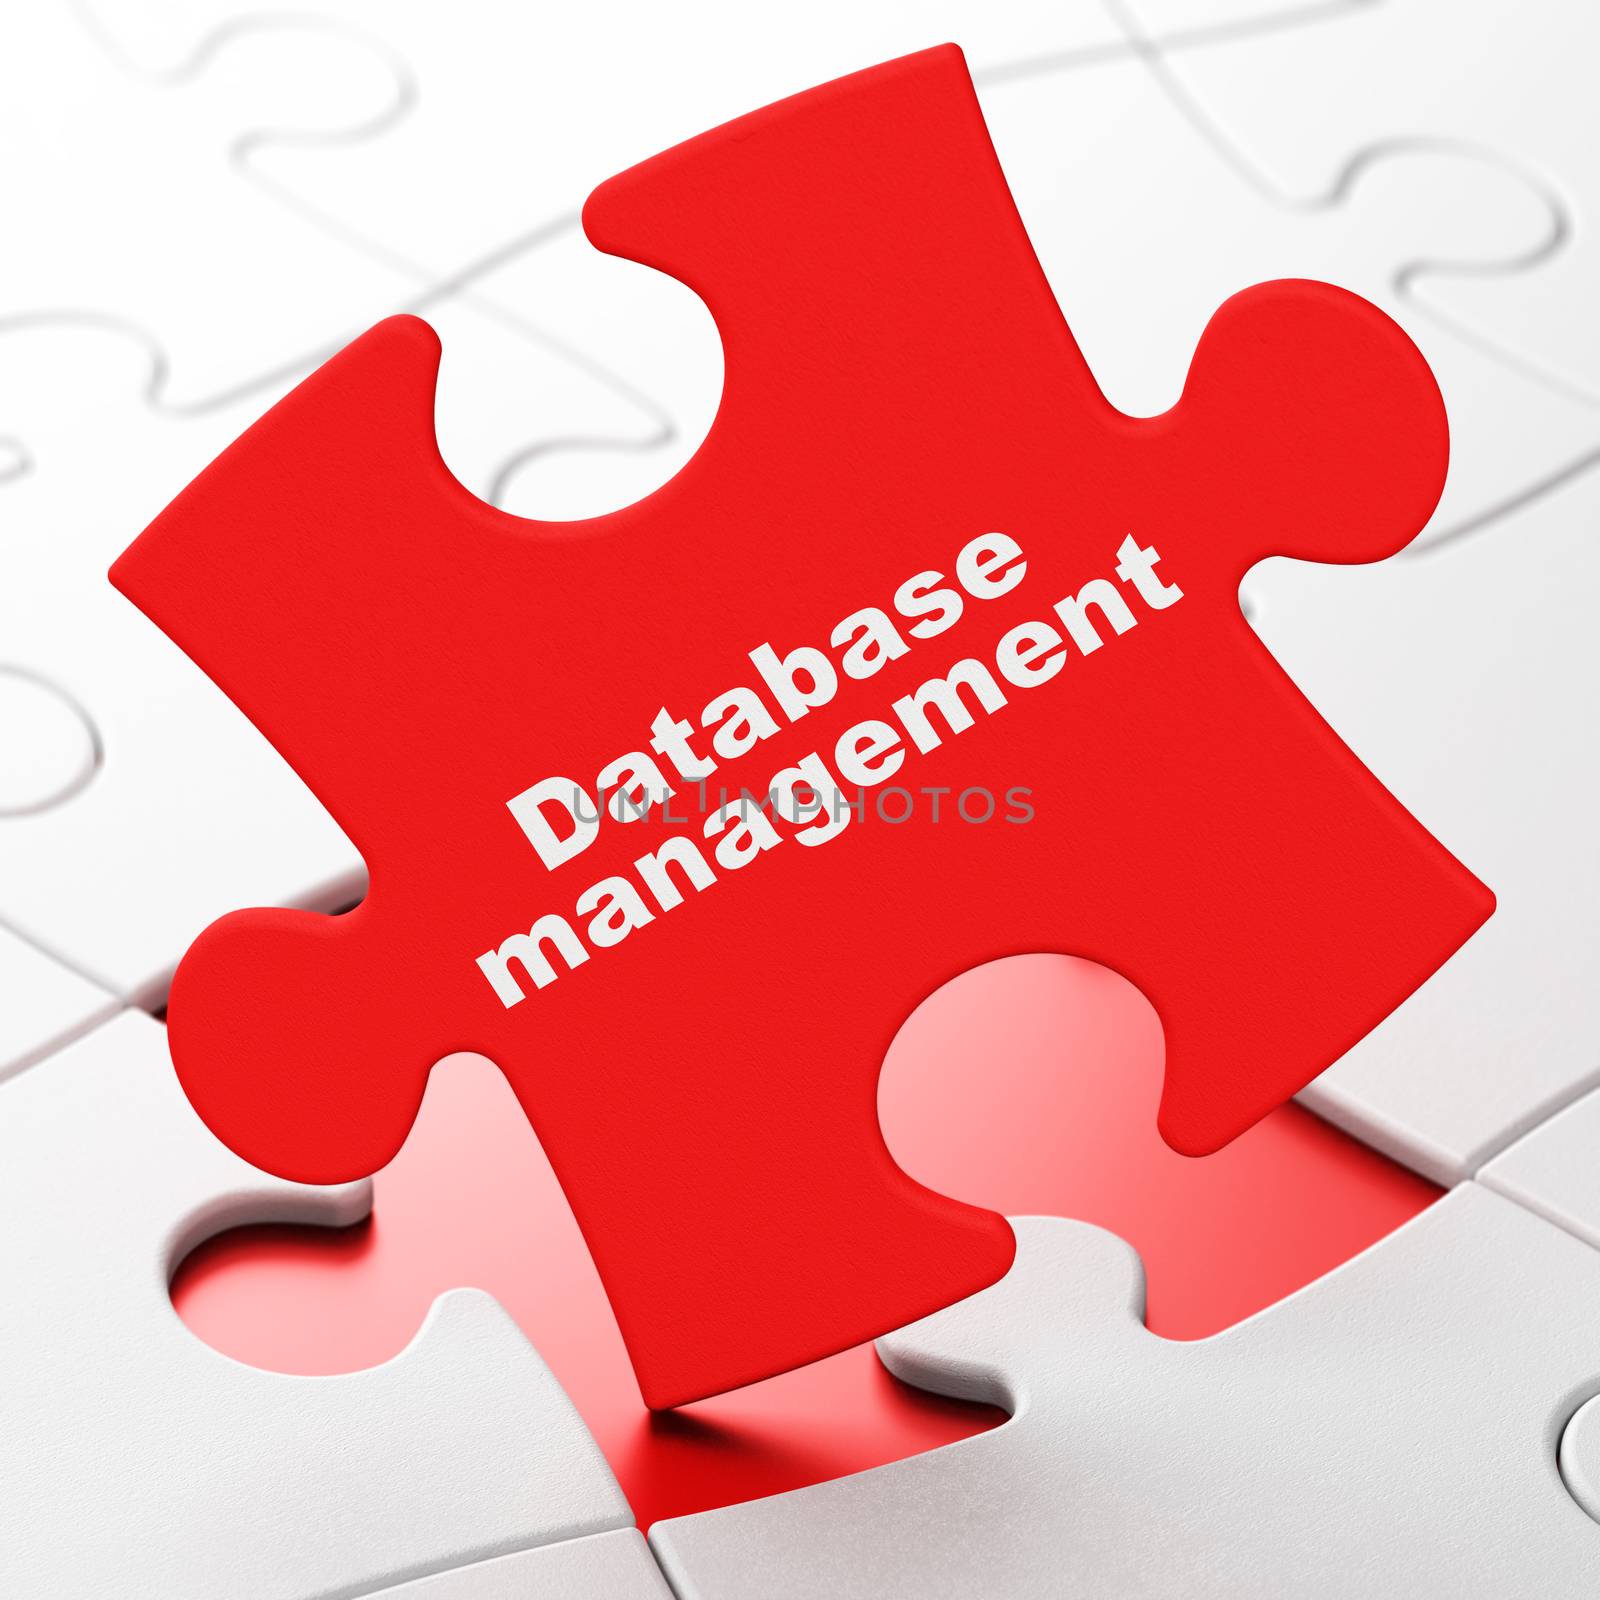 Database concept: Database Management on Red puzzle pieces background, 3D rendering